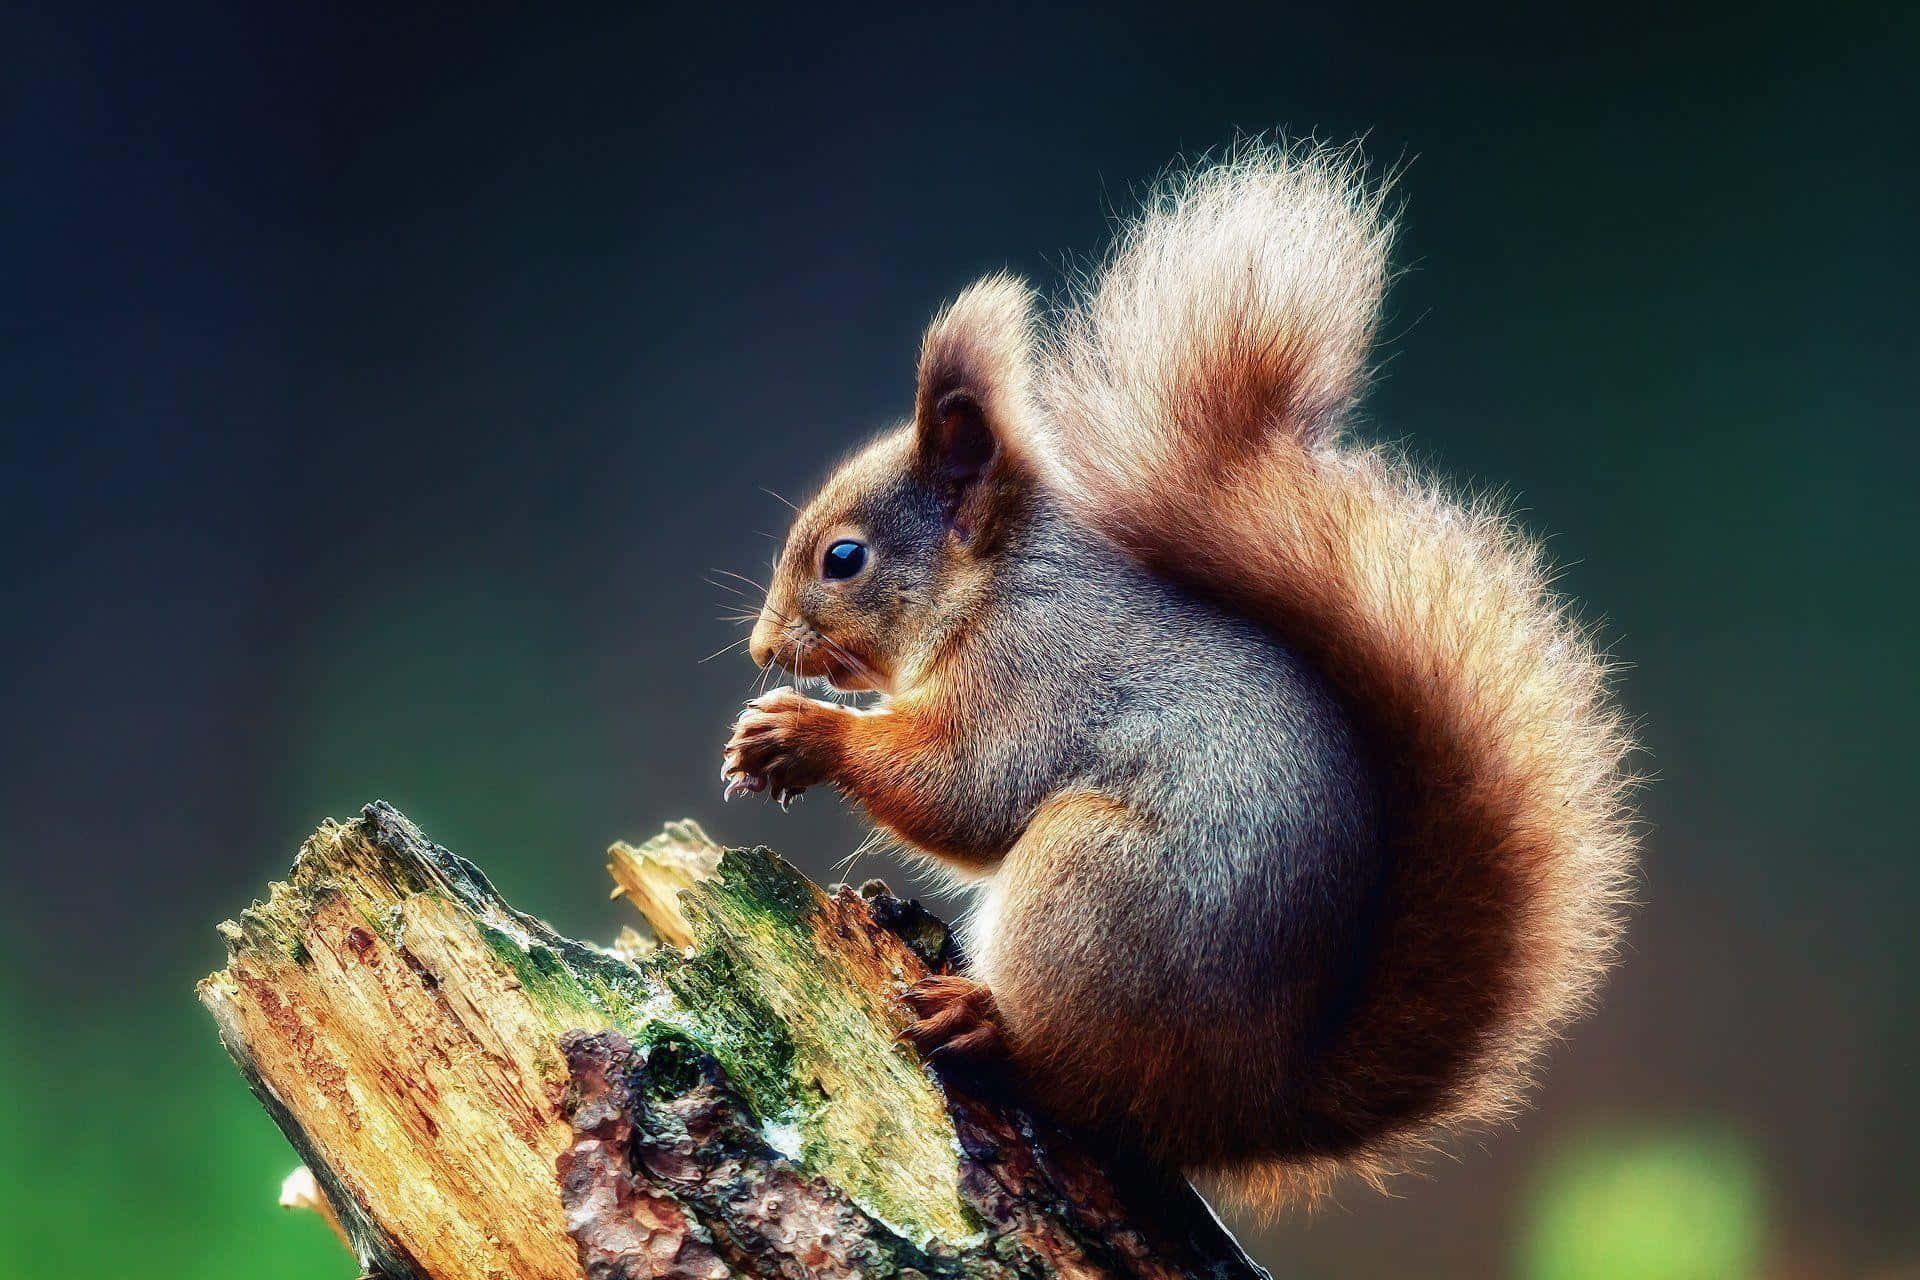 Download Funny Squirrel Pictures 1920 x 1280 